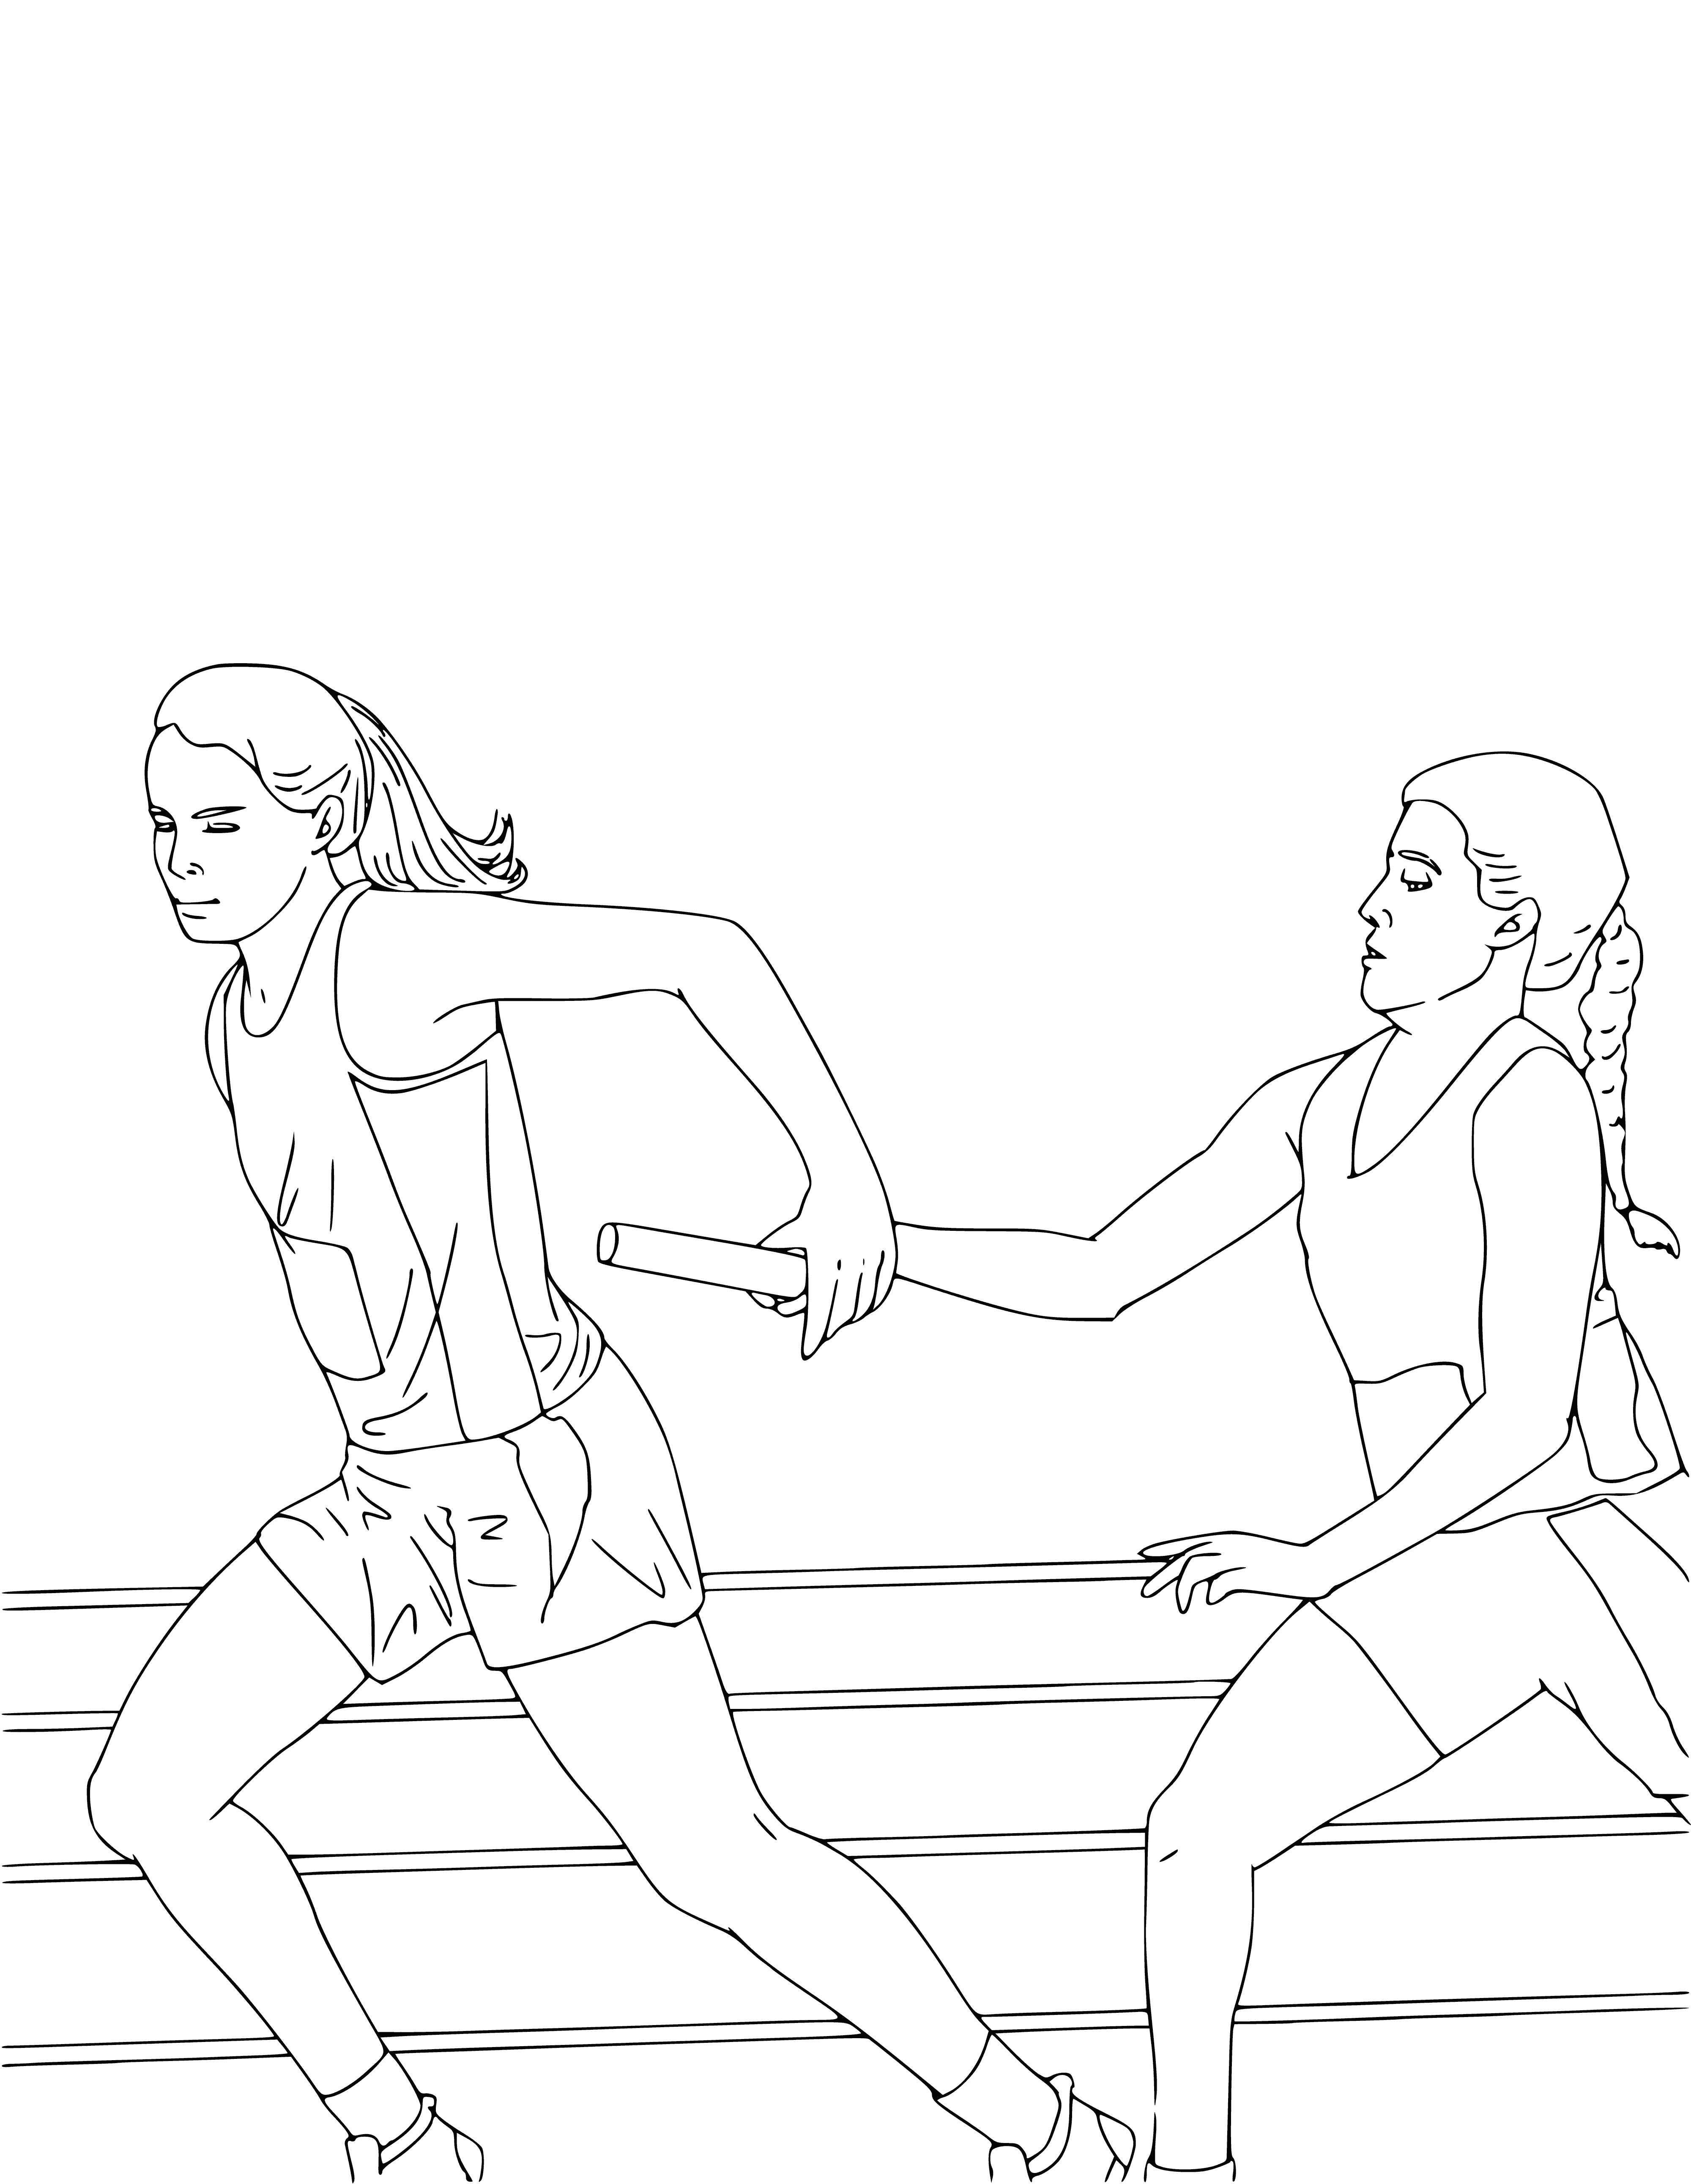 coloring page: Two teams of four runners in an intense relay race, passing a baton. Two runners running, two ready to go. Fourth runner not coloring paged. #Running #RelayRace